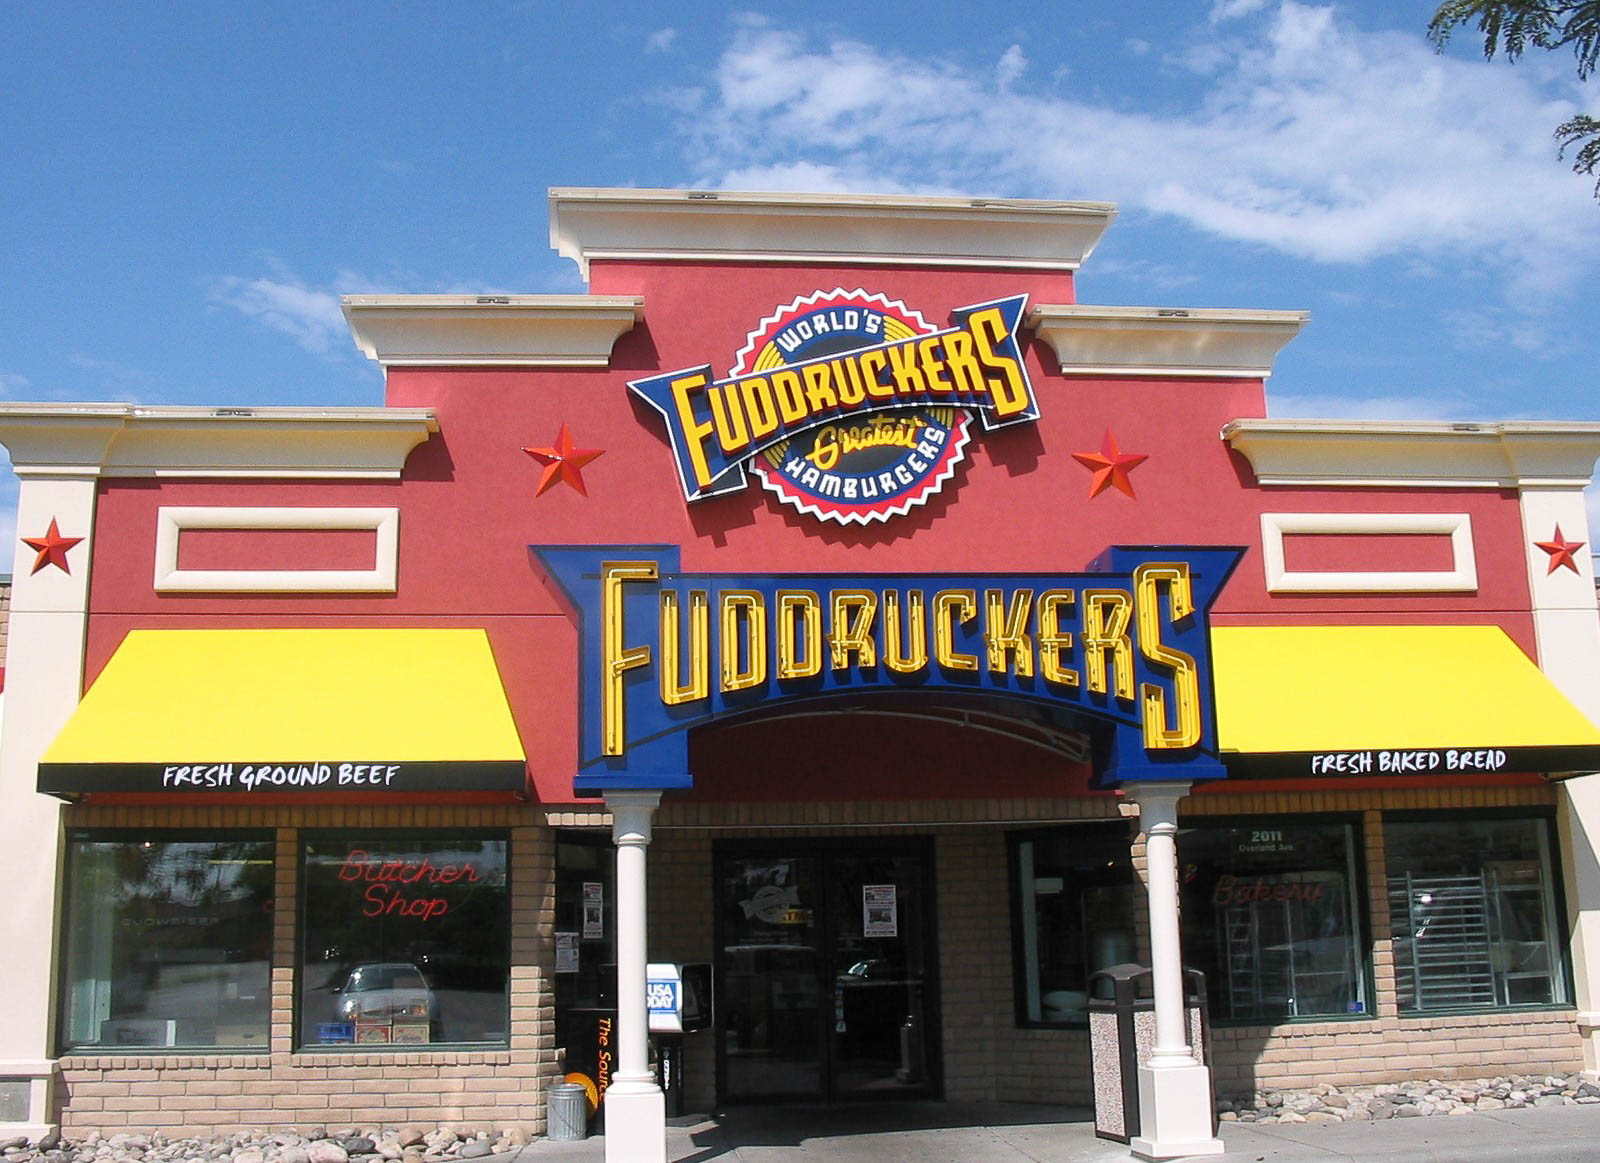 Awning: Awning for Fuddruckers